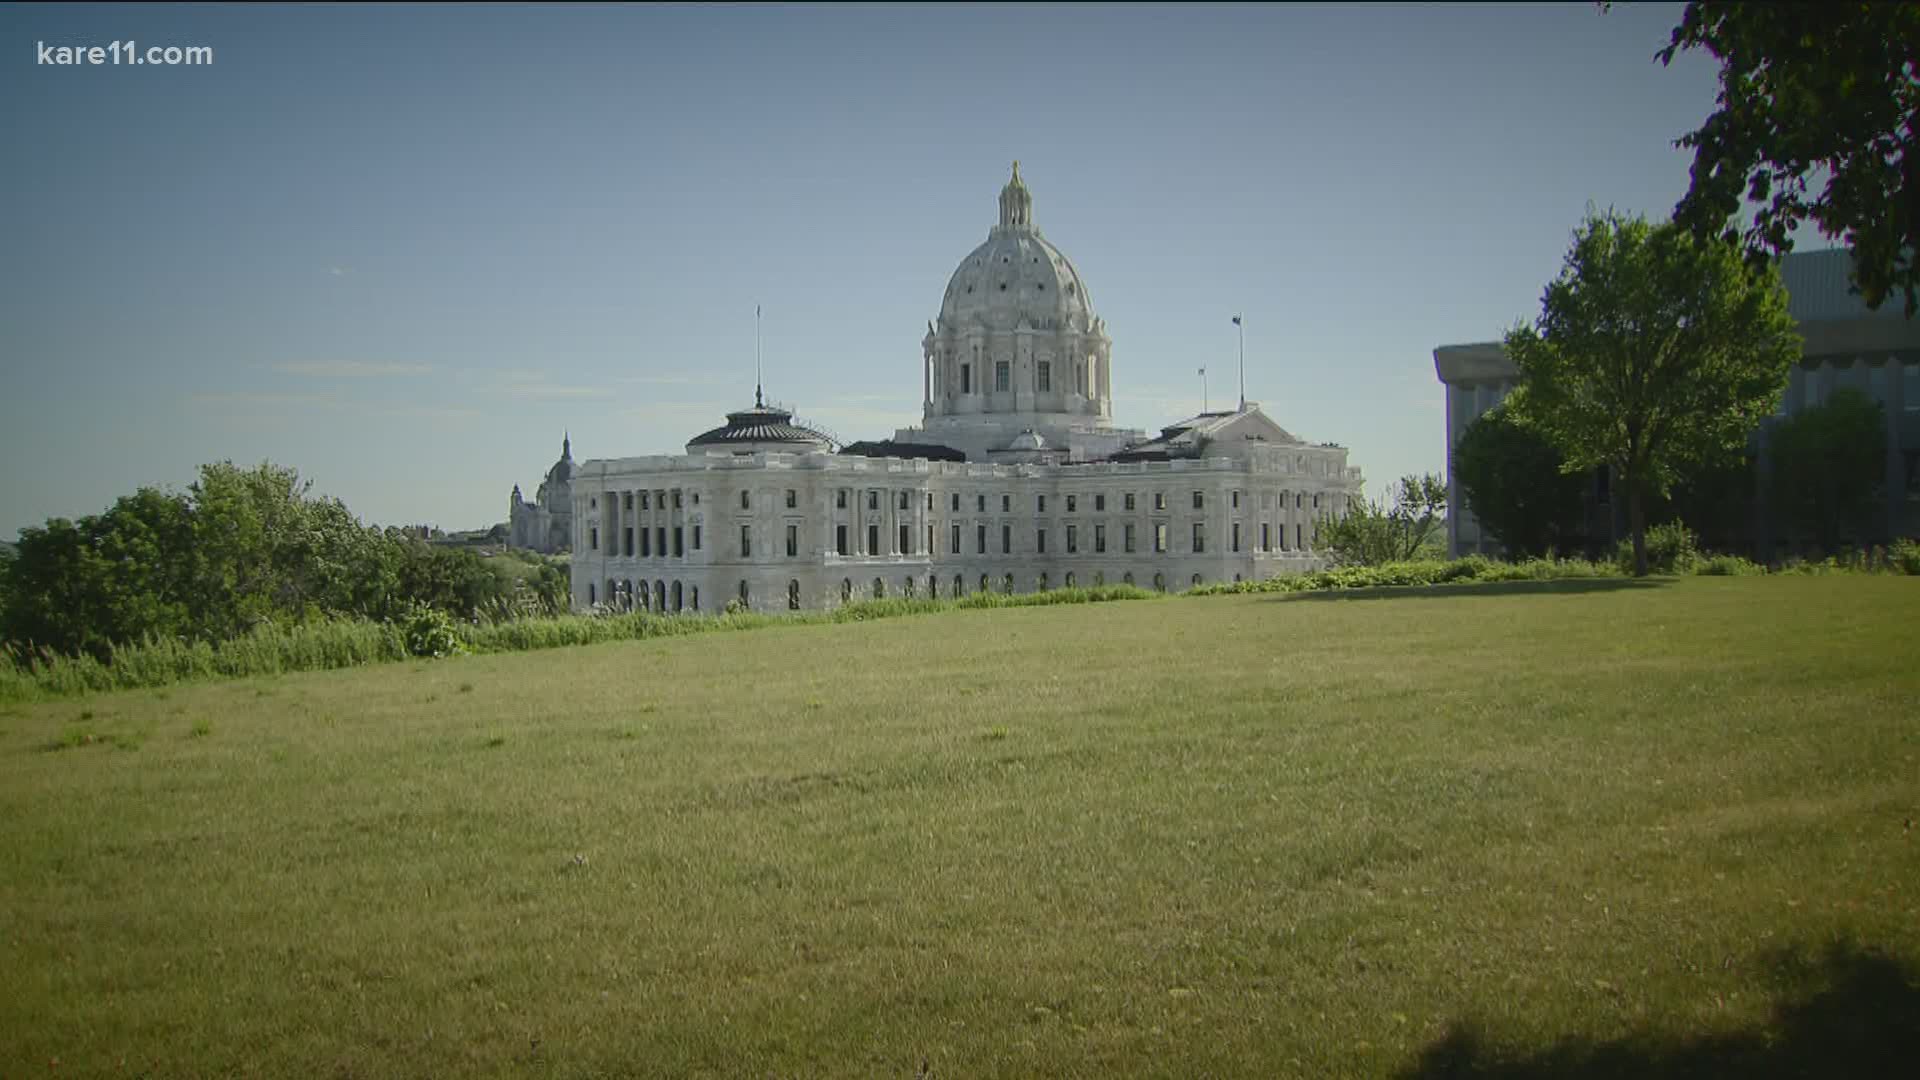 Minnesota lawmakers will try to agree on a budget deal as well as looking at paid family leave, voting laws and changes to the state's vehicle emissions standards.